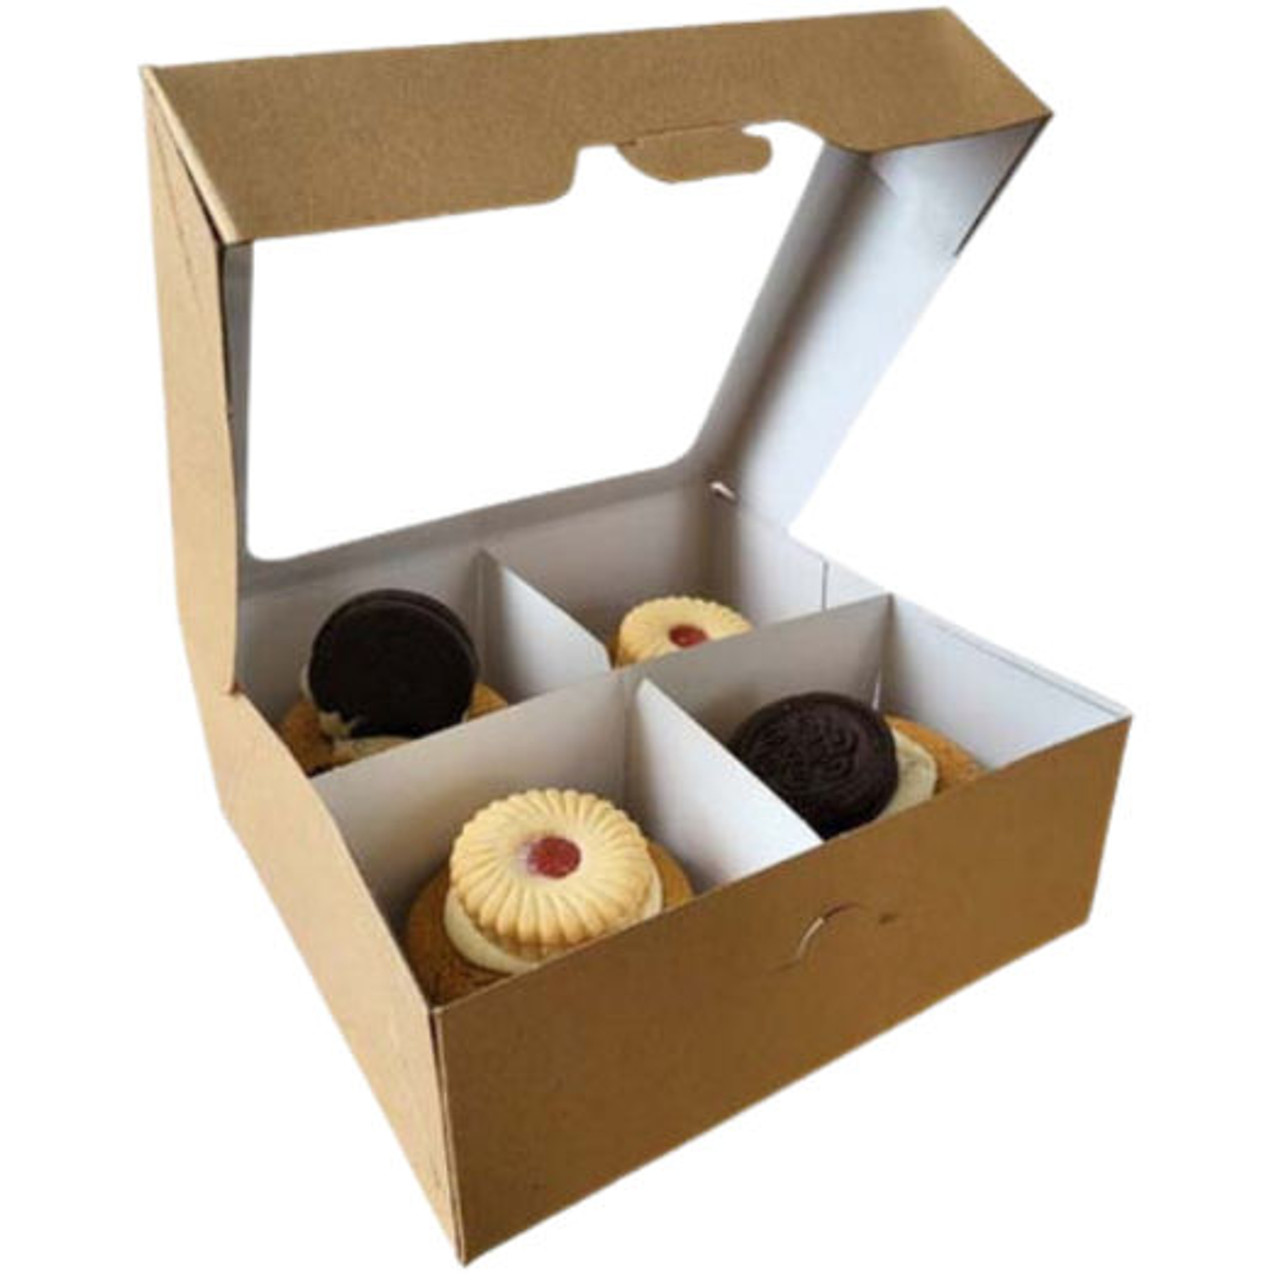 Pack x 50 Plain Kraft Bakery boxes with window 7.5"x 7.25" X 2.75" ( Removable inserts )